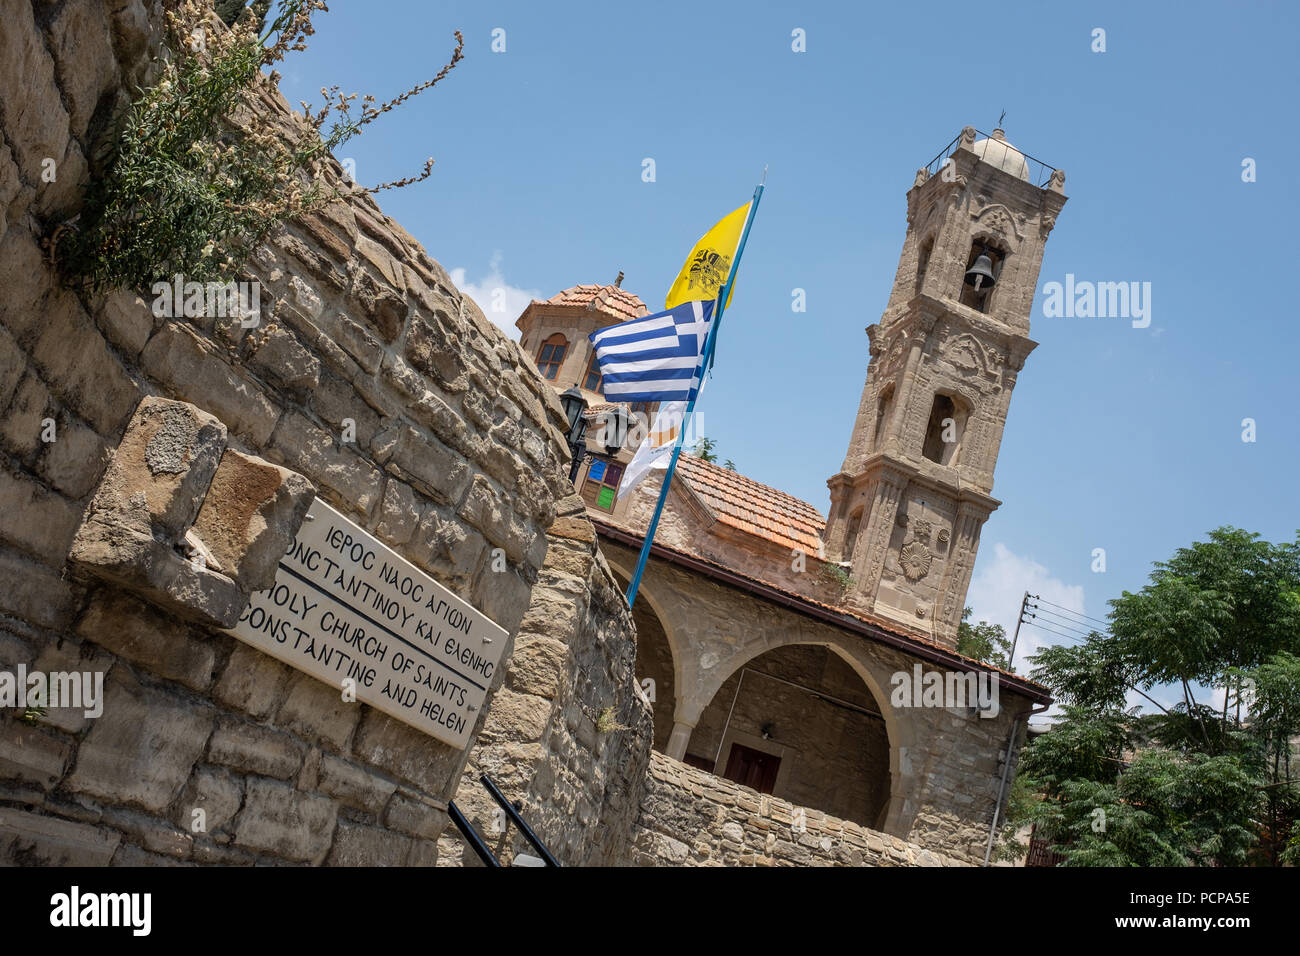 Exterior view of picteresque church Holy Church Of Saints Constantine and Helen situated in the scenic village of Tochni, Larnaca region of Cyprus Stock Photo